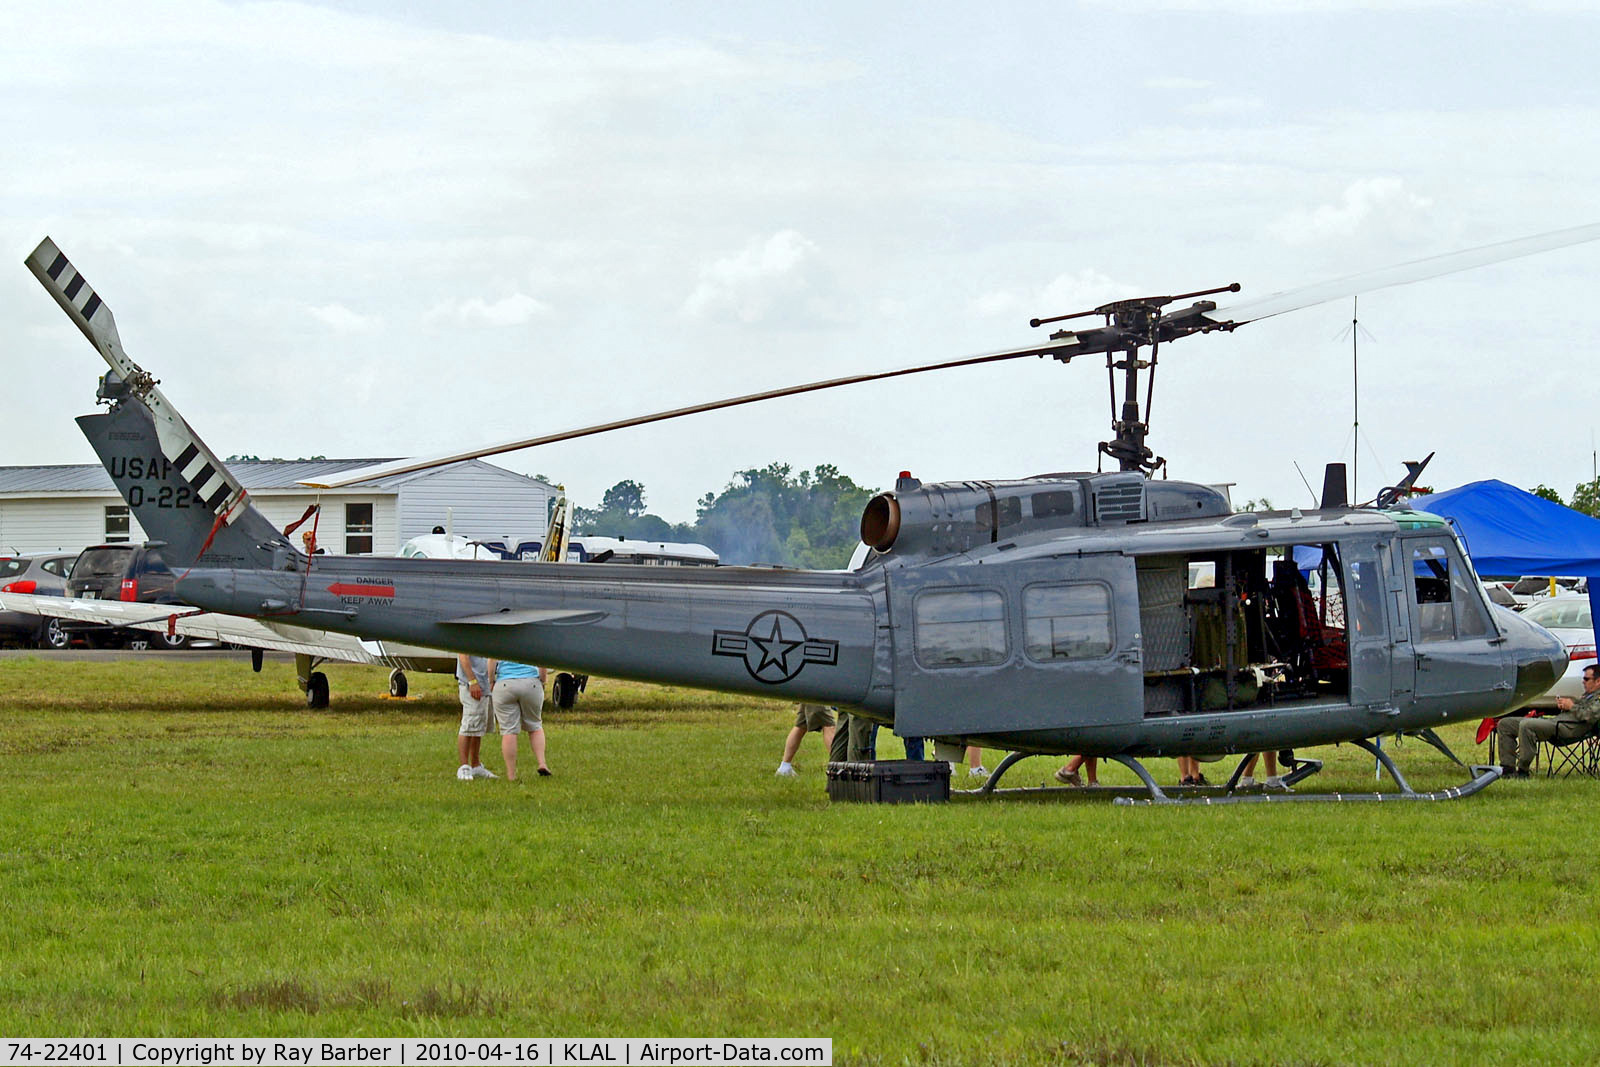 74-22401, 1974 Bell UH-1H Iroquois C/N 13725, 74-22401   (0-22401) Bell UH-1H Iroquois [13725] (United States Air Force) Lakeland-Linder~N 16/04/2010